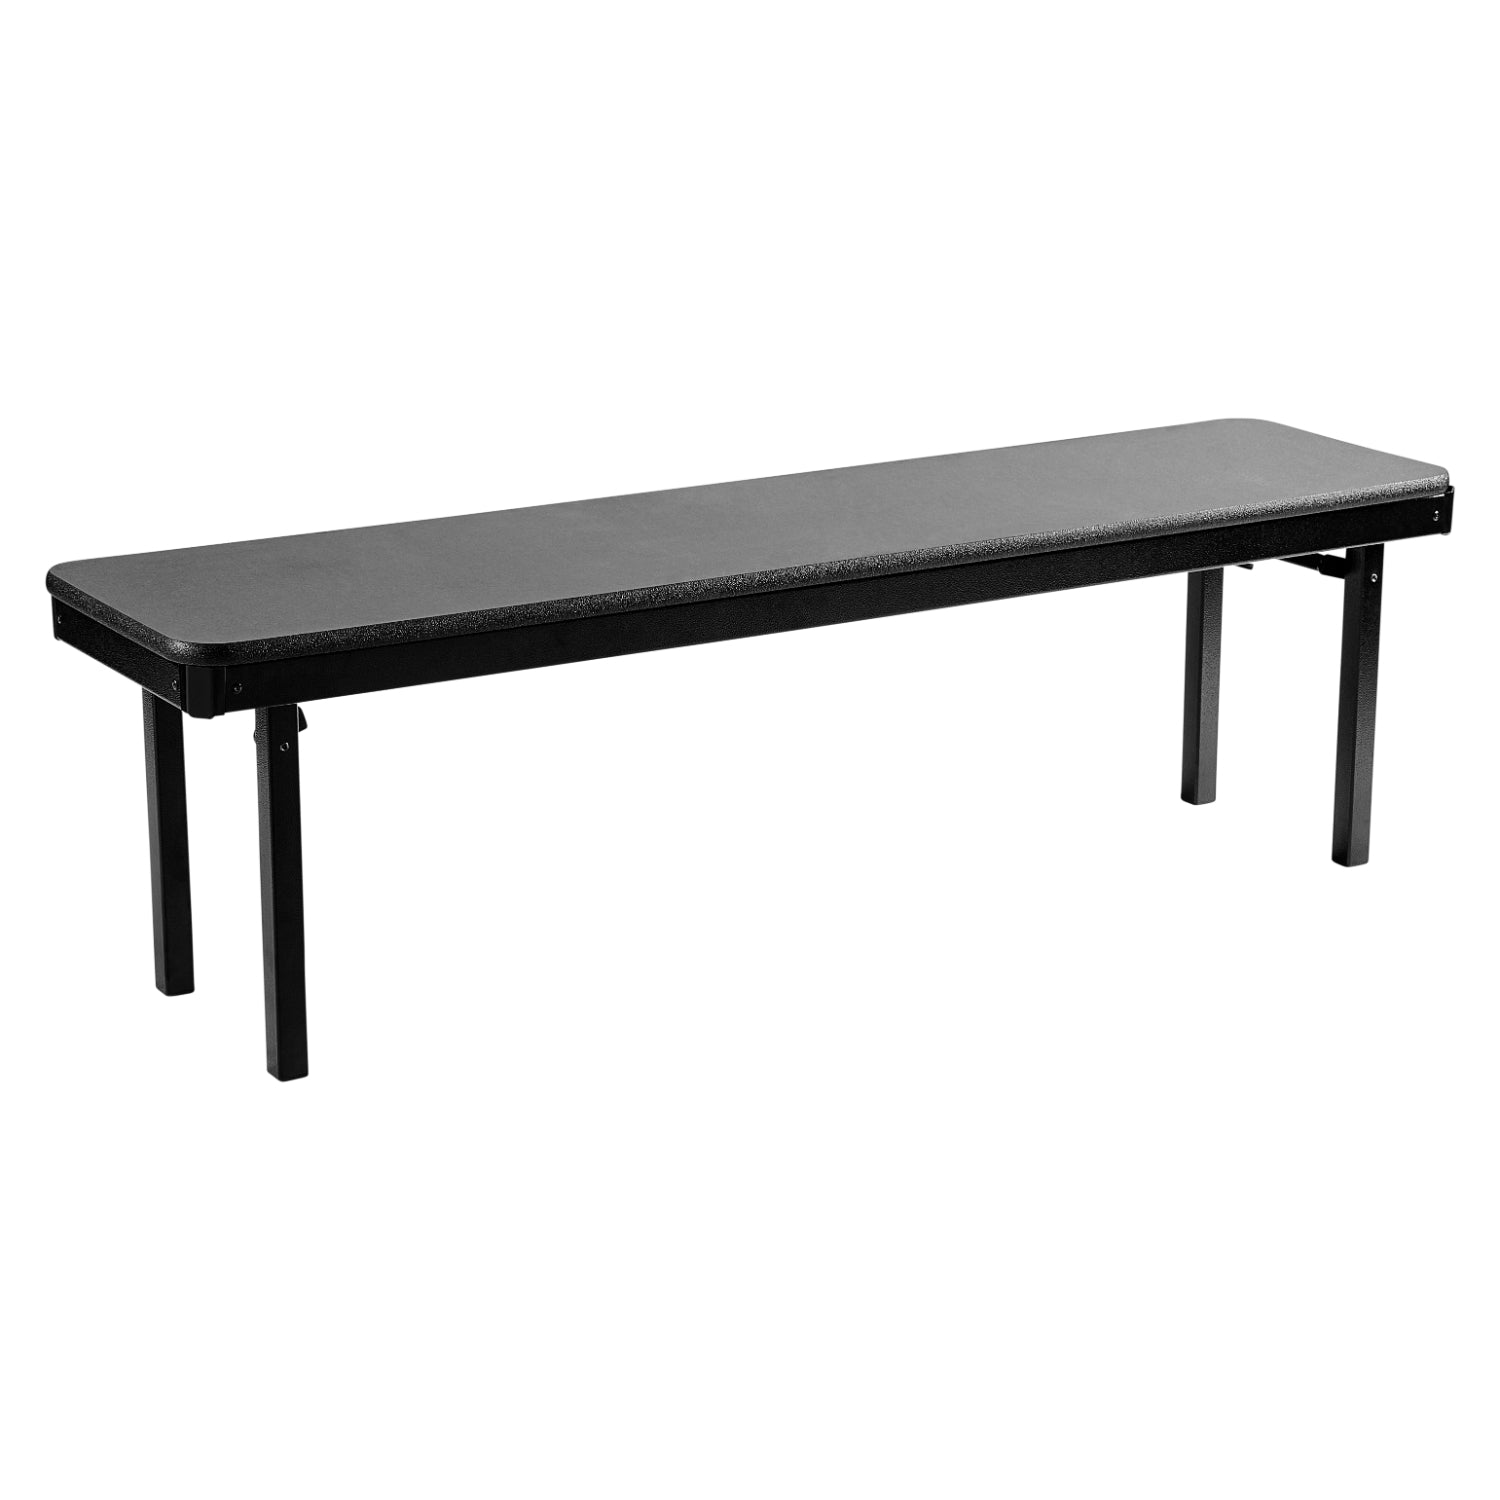 Max Seating Folding Bench, 15" x 60", MDF Core, High Pressure Laminate Top with ProtectEdge